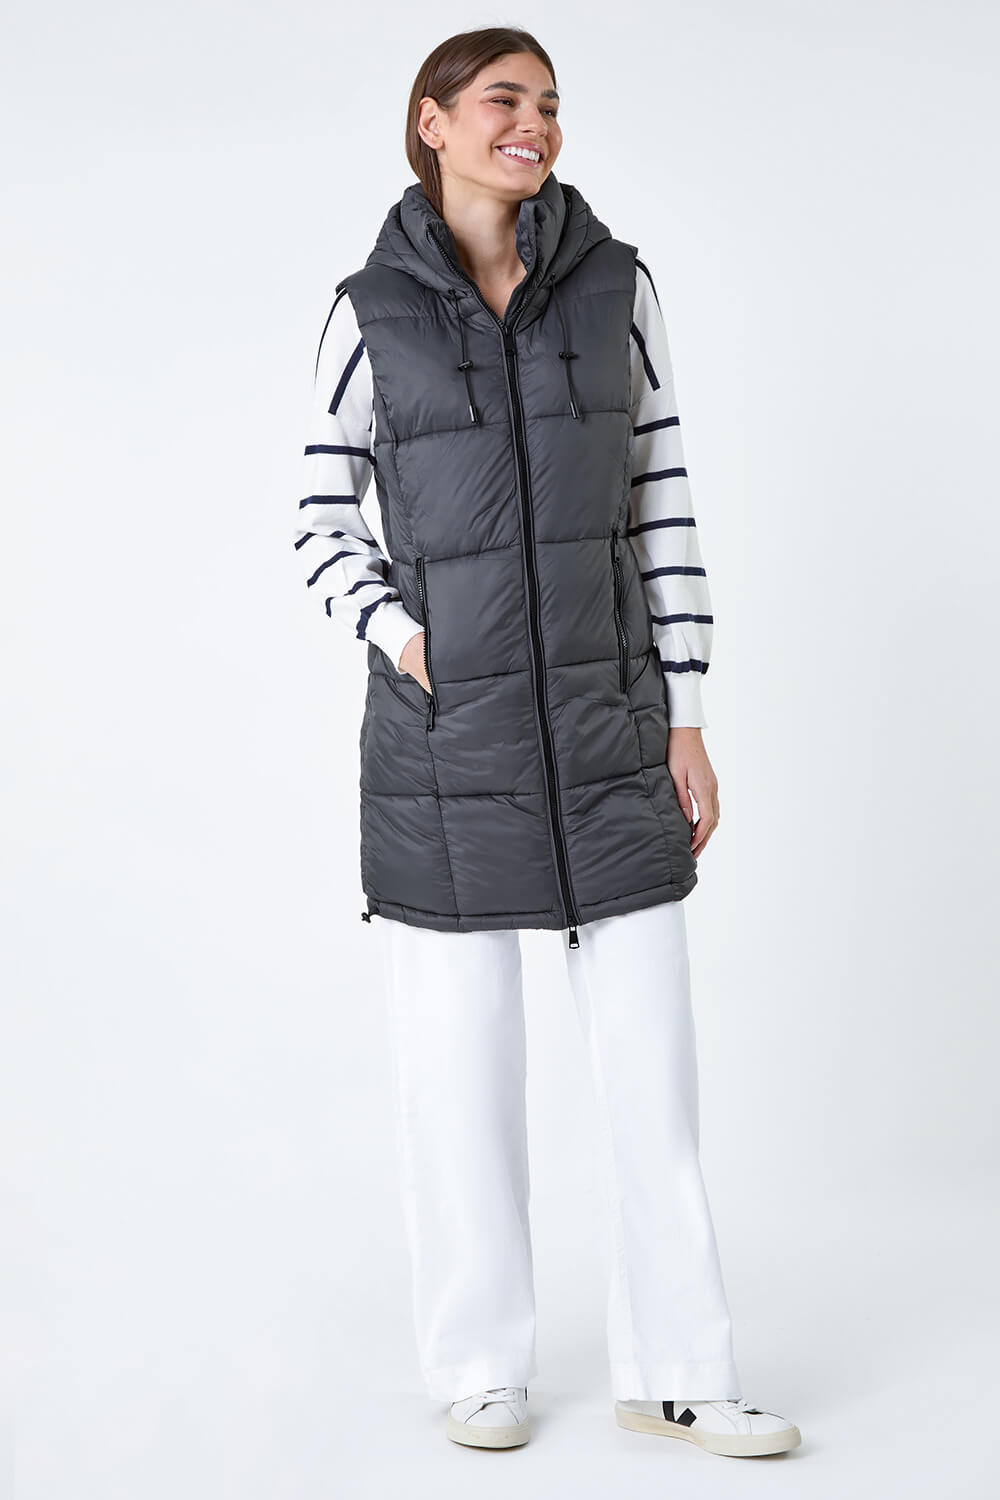 Charcoal Padded Longline Hooded Gilet, Image 4 of 6